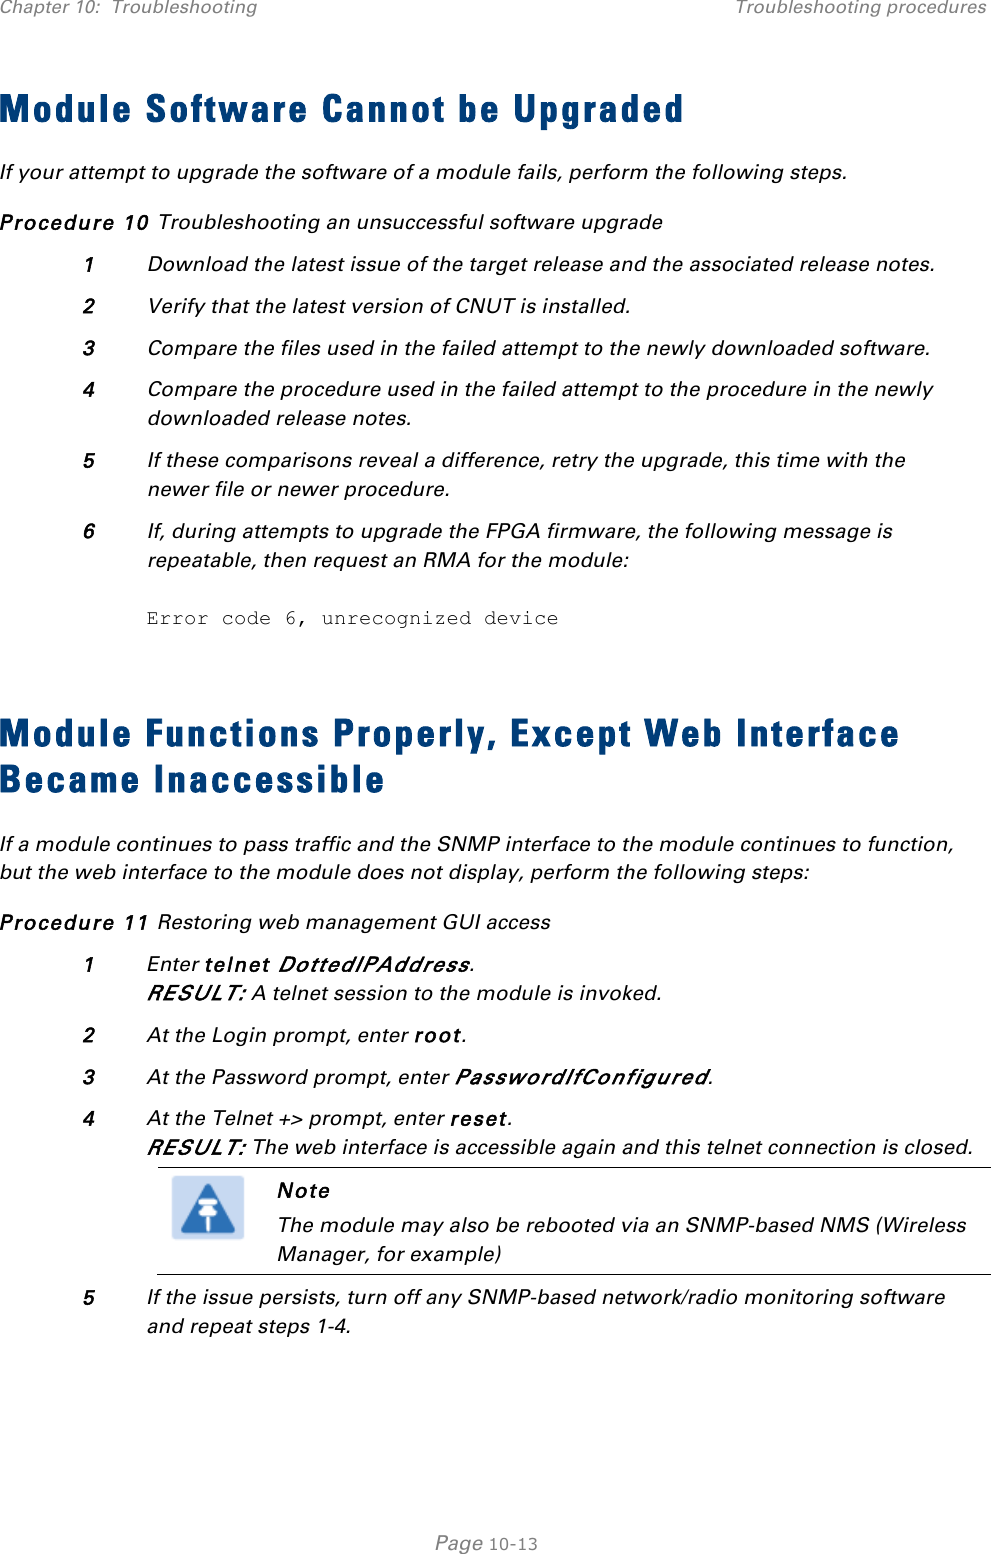 Chapter 10:  Troubleshooting Troubleshooting procedures   Page 10-13 Module Software Cannot be Upgraded If your attempt to upgrade the software of a module fails, perform the following steps. Procedure 10 Troubleshooting an unsuccessful software upgrade 1 Download the latest issue of the target release and the associated release notes. 2 Verify that the latest version of CNUT is installed. 3 Compare the files used in the failed attempt to the newly downloaded software. 4 Compare the procedure used in the failed attempt to the procedure in the newly downloaded release notes. 5 If these comparisons reveal a difference, retry the upgrade, this time with the newer file or newer procedure. 6 If, during attempts to upgrade the FPGA firmware, the following message is repeatable, then request an RMA for the module:  Error code 6, unrecognized device  Module Functions Properly, Except Web Interface Became Inaccessible If a module continues to pass traffic and the SNMP interface to the module continues to function, but the web interface to the module does not display, perform the following steps: Procedure 11 Restoring web management GUI access 1 Enter telnet DottedIPAddress. RESULT: A telnet session to the module is invoked. 2 At the Login prompt, enter root. 3 At the Password prompt, enter PasswordIfConfigured. 4 At the Telnet +&gt; prompt, enter reset. RESULT: The web interface is accessible again and this telnet connection is closed.  Note The module may also be rebooted via an SNMP-based NMS (Wireless Manager, for example)  5 If the issue persists, turn off any SNMP-based network/radio monitoring software and repeat steps 1-4.  